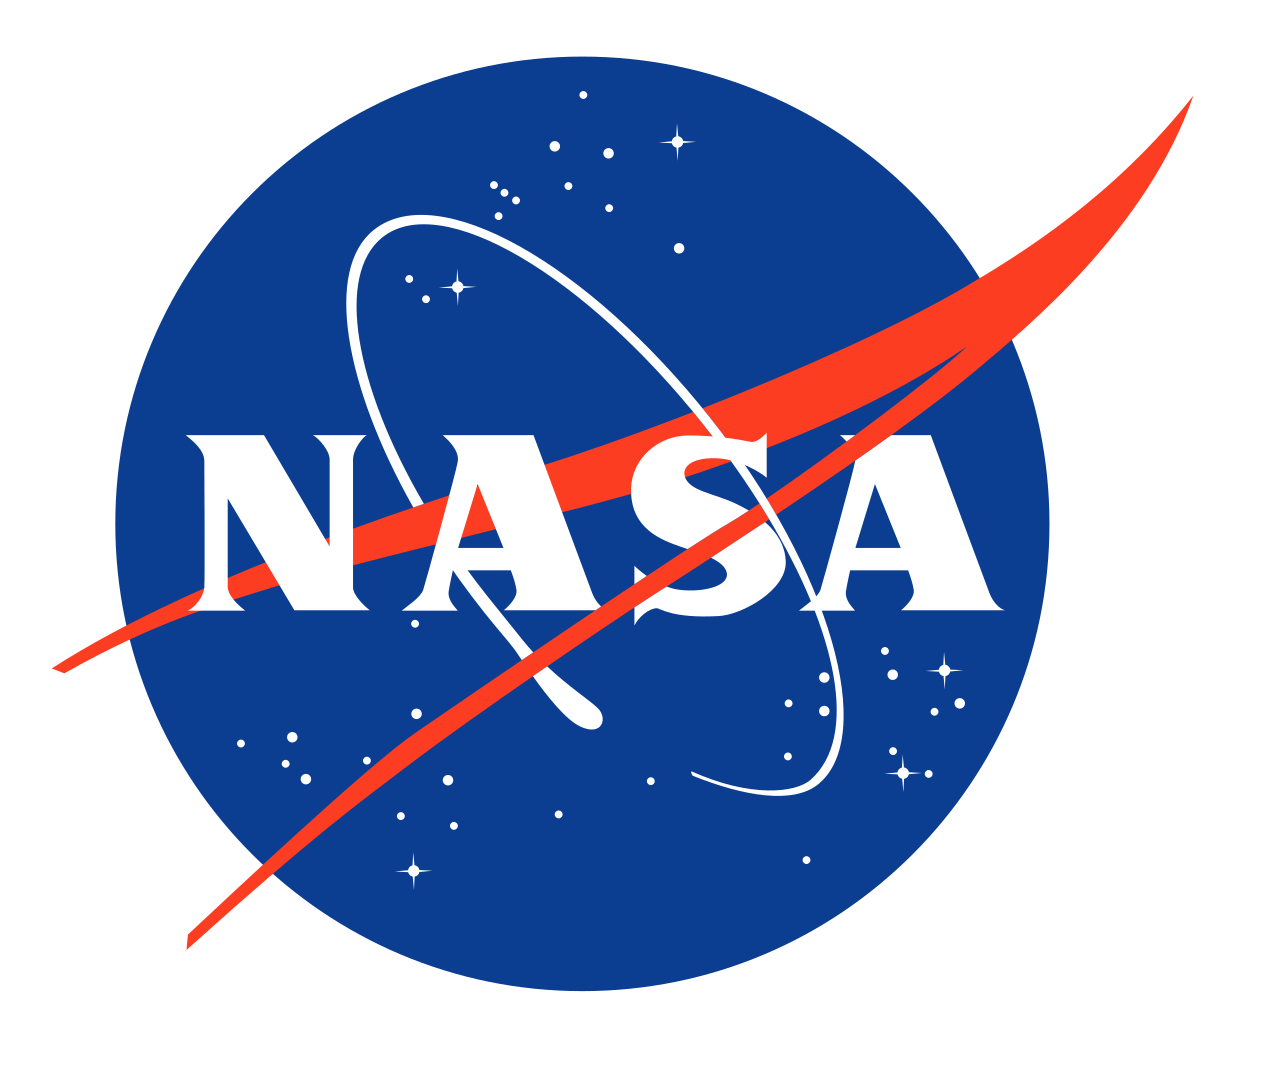 A blue sphere with stars, white letters N-A-S-A in Helvetica font; a red chevron representing wings, and an orbiting spacecraft